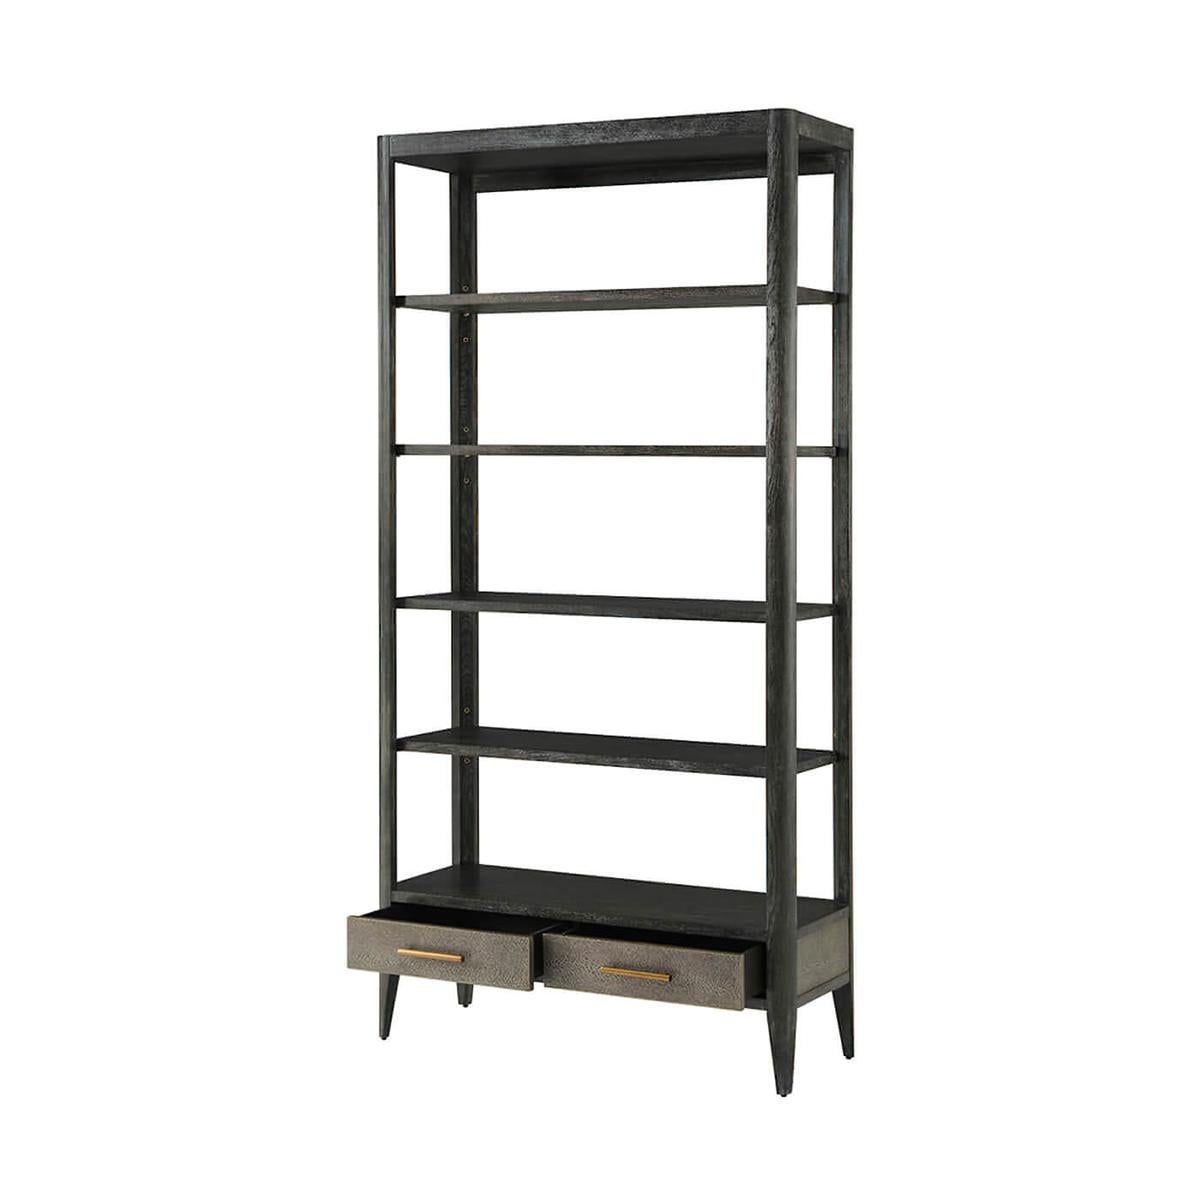 This contemporary etagere features five tiers, including three adjustable shelves that provide flexible storage solutions for books and decor.

Constructed from high-quality Beech and Primavera veneer, the etagere boasts a dark finish that